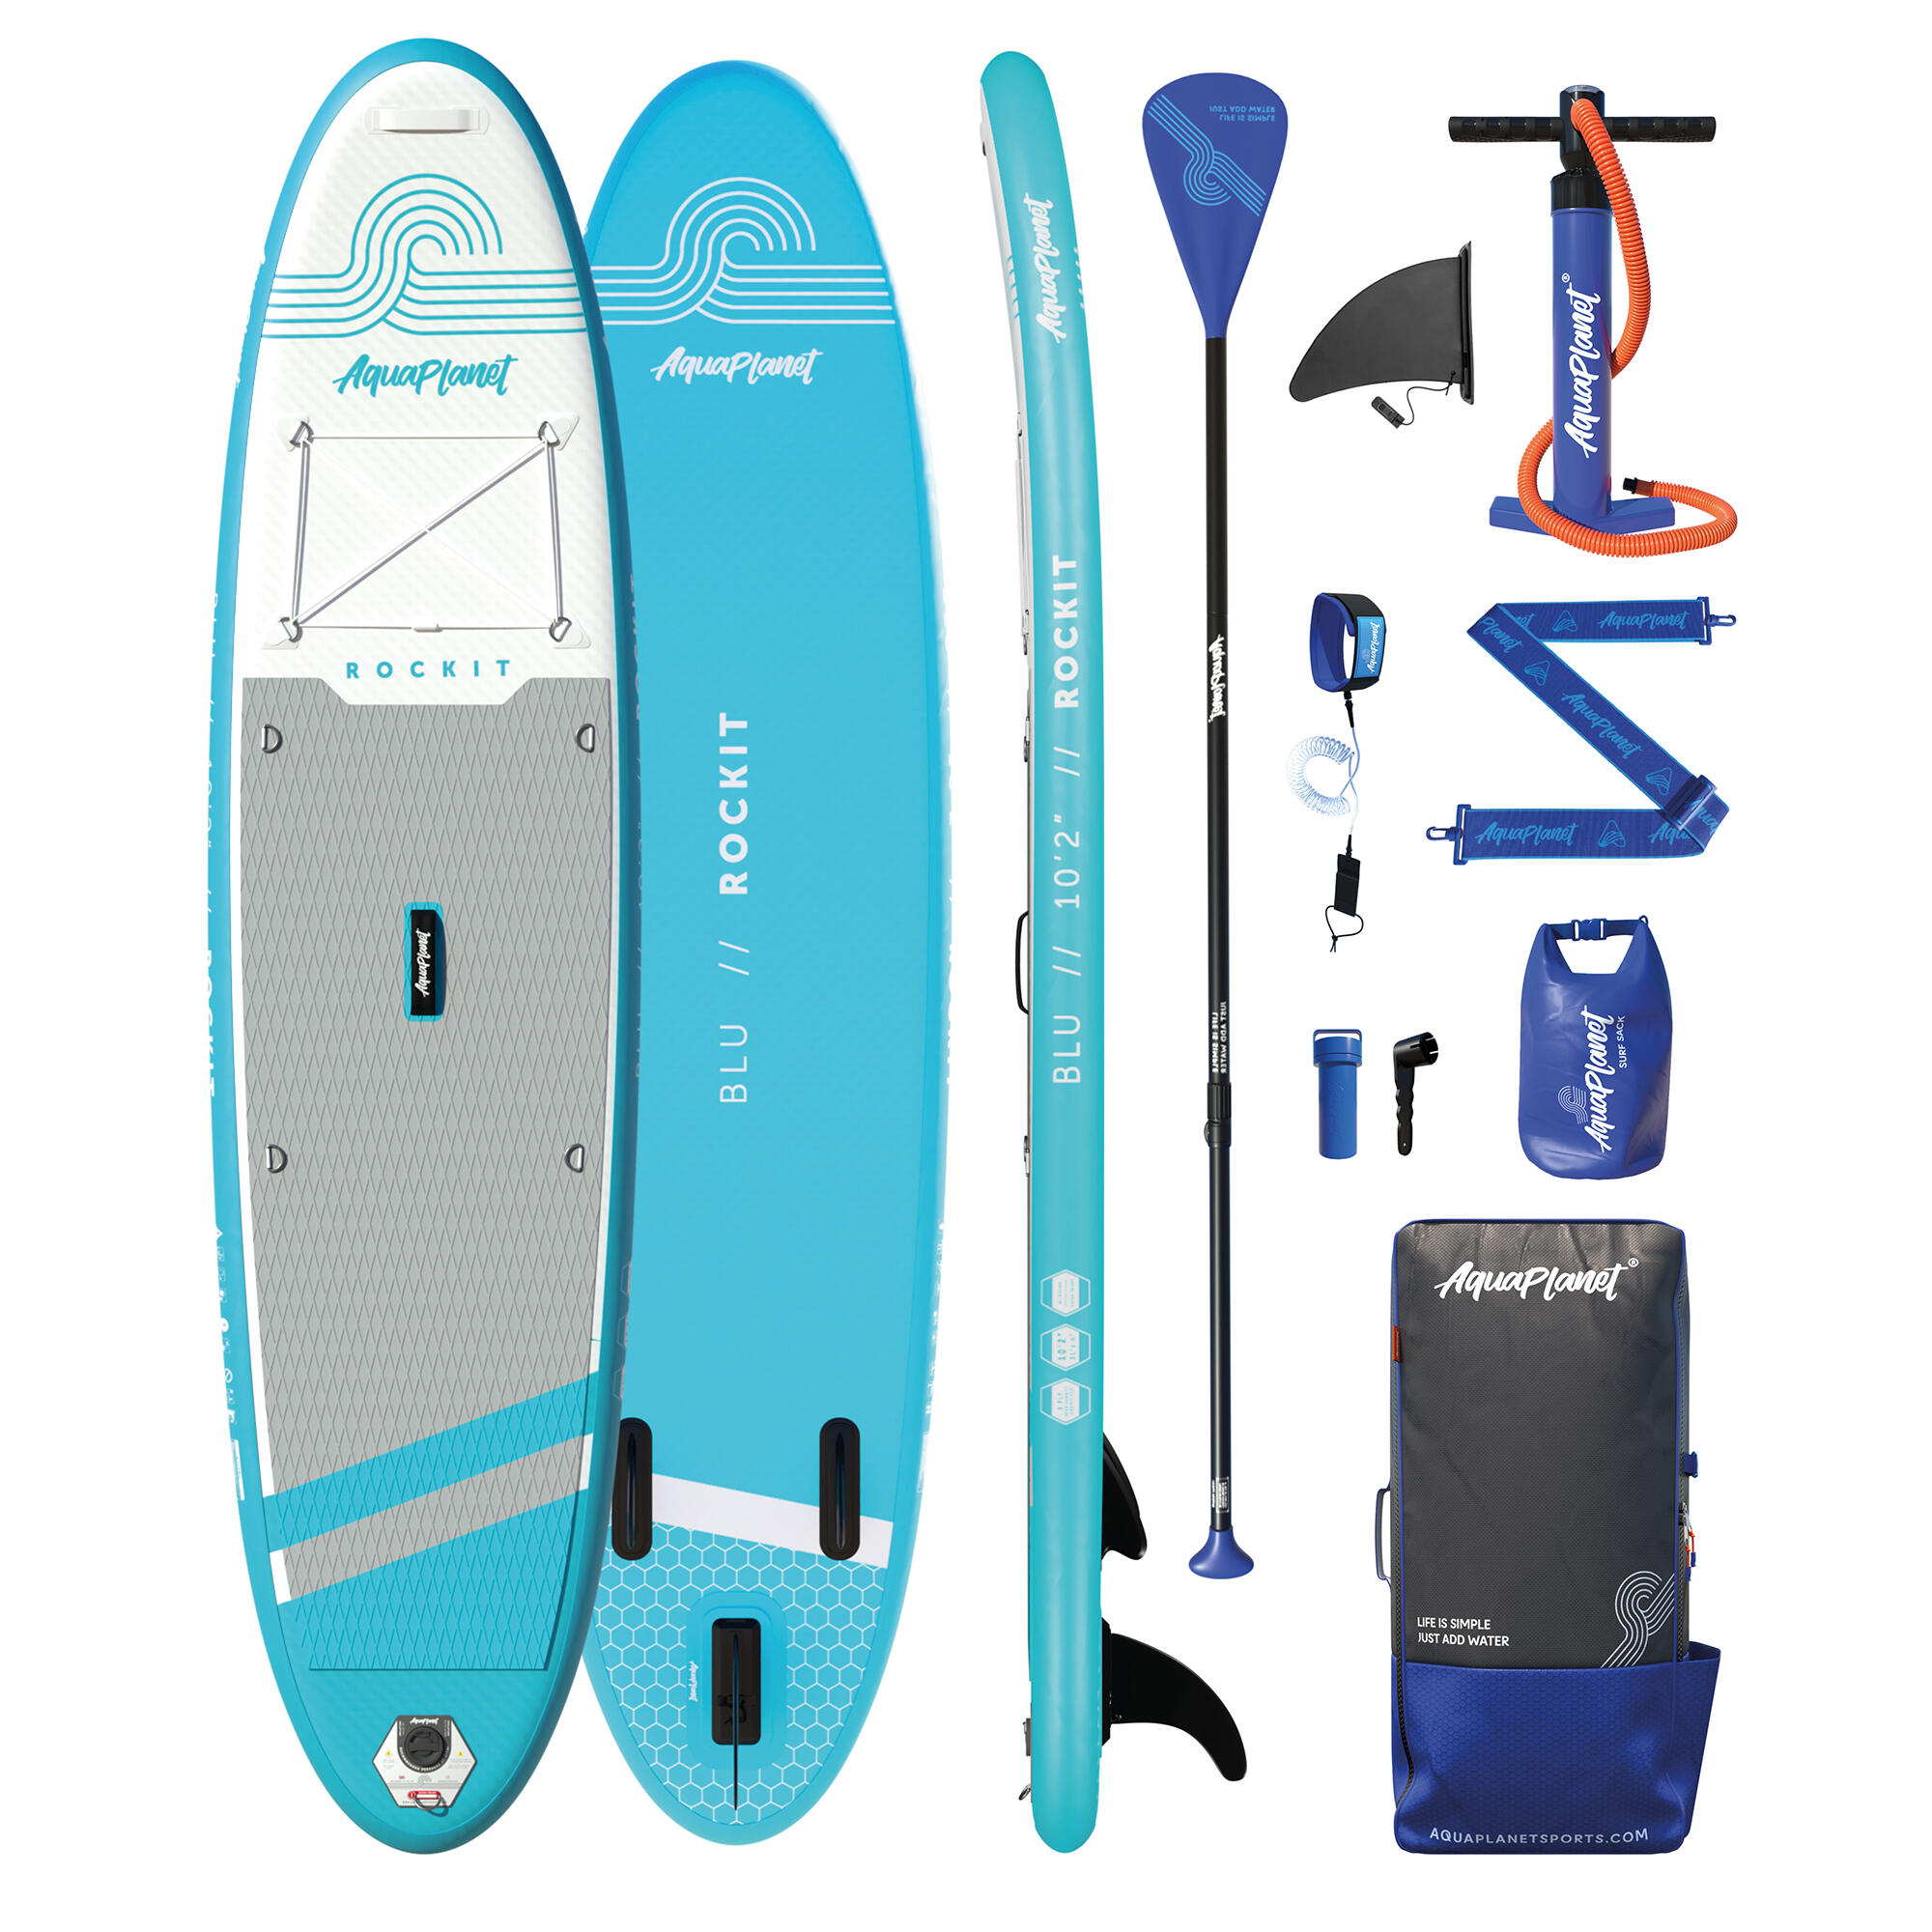 AQUAPLANET Aquaplanet ROCKIT 10'2 Inflatable Paddle Board Package - Blue